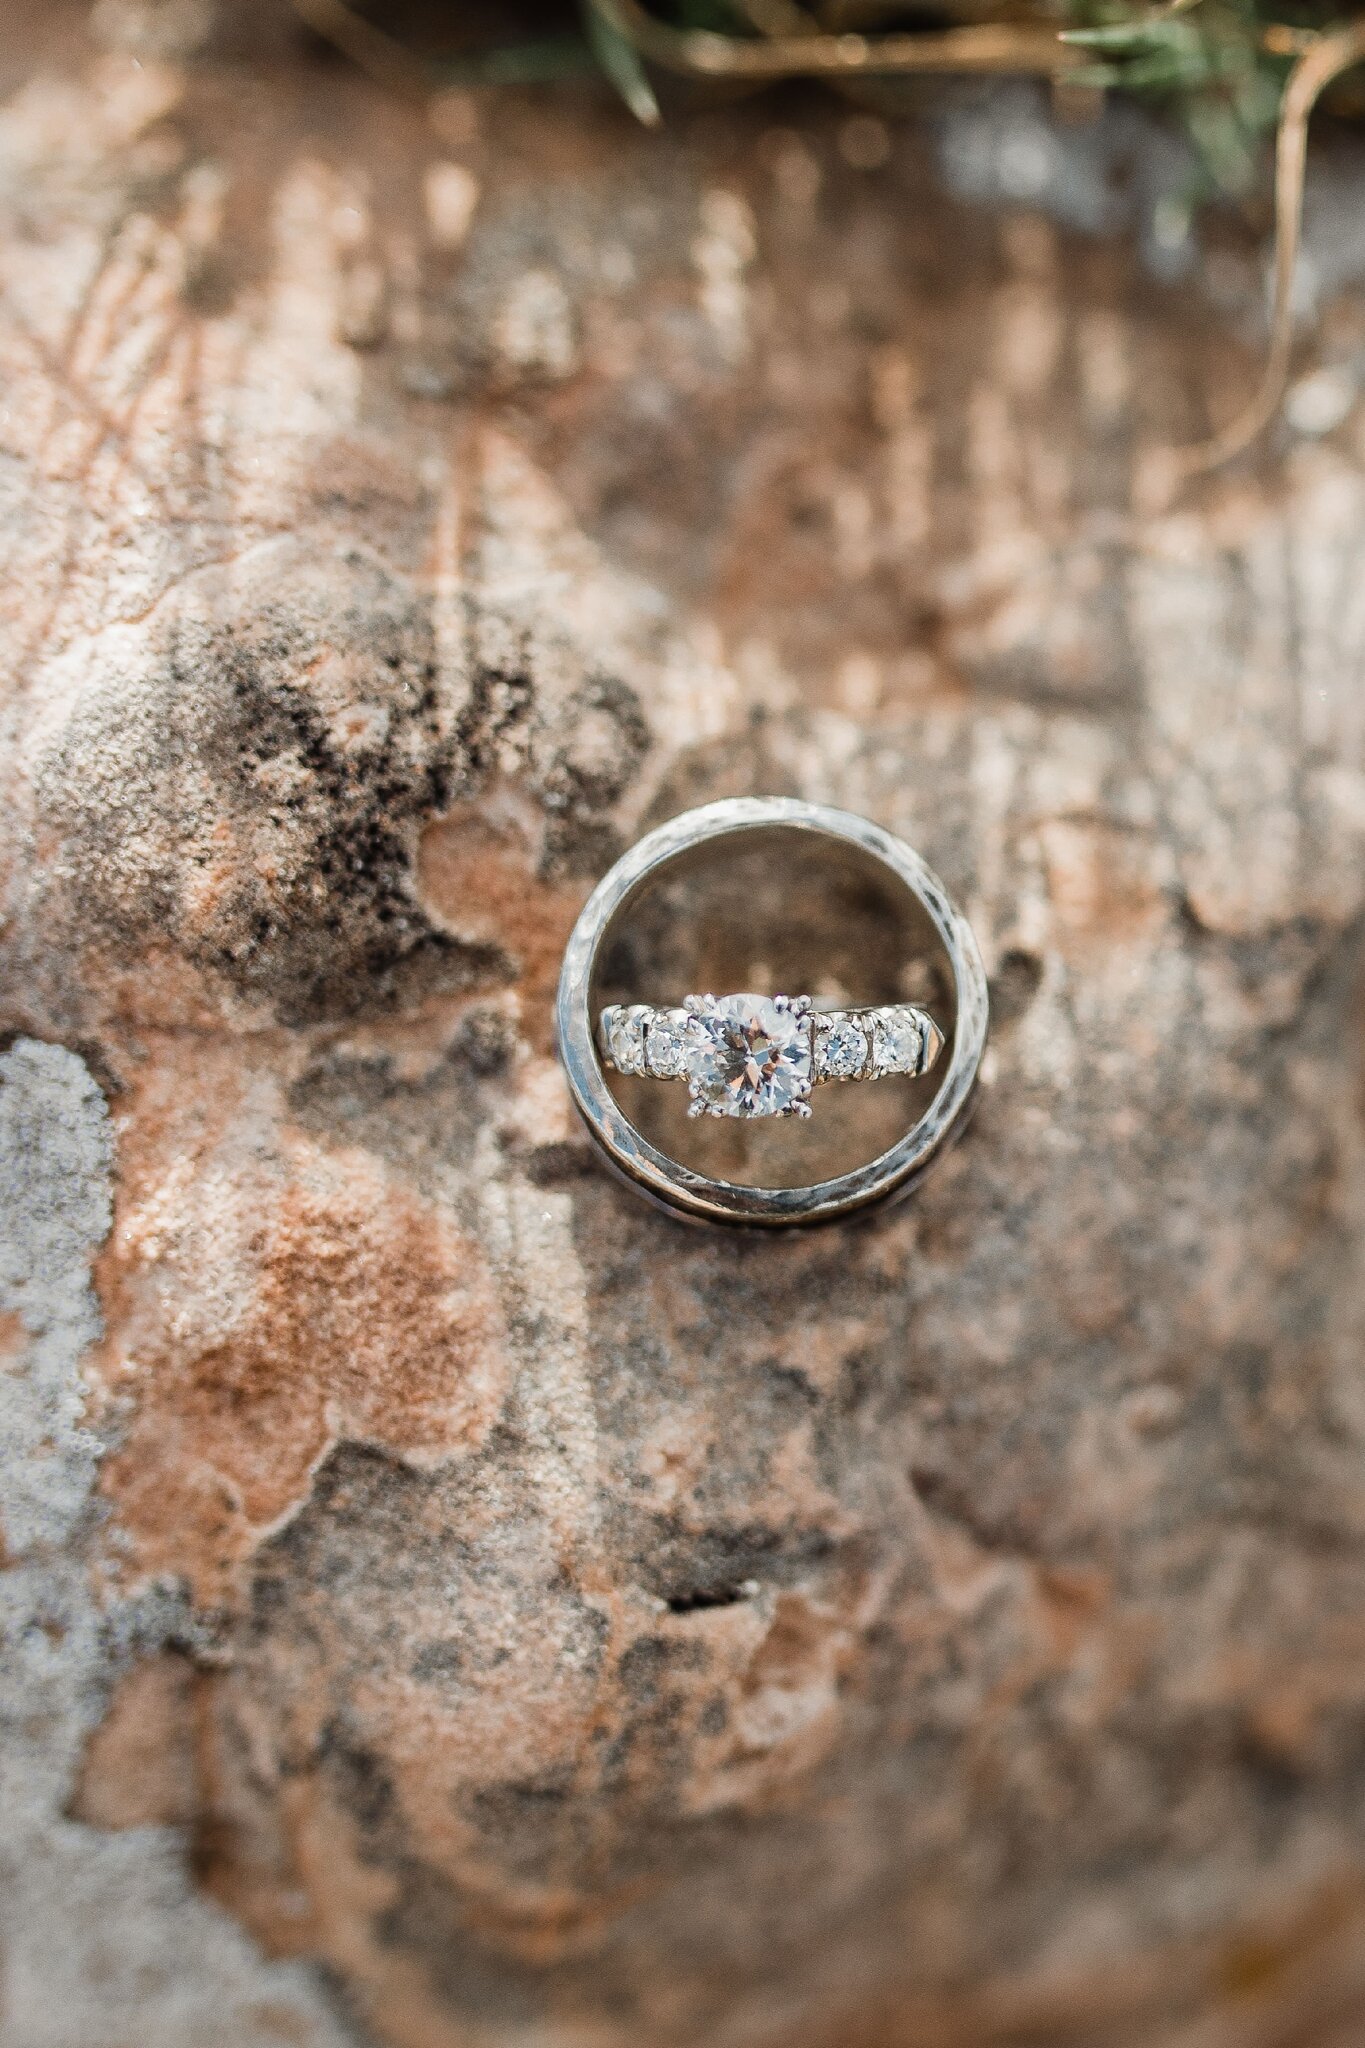 Alicia+lucia+photography+-+albuquerque+wedding+photographer+-+santa+fe+wedding+photography+-+new+mexico+wedding+photographer+-+new+mexico+wedding+-+wedding+ring+-+engagement+ring+-+wedding+rings_0055.jpg